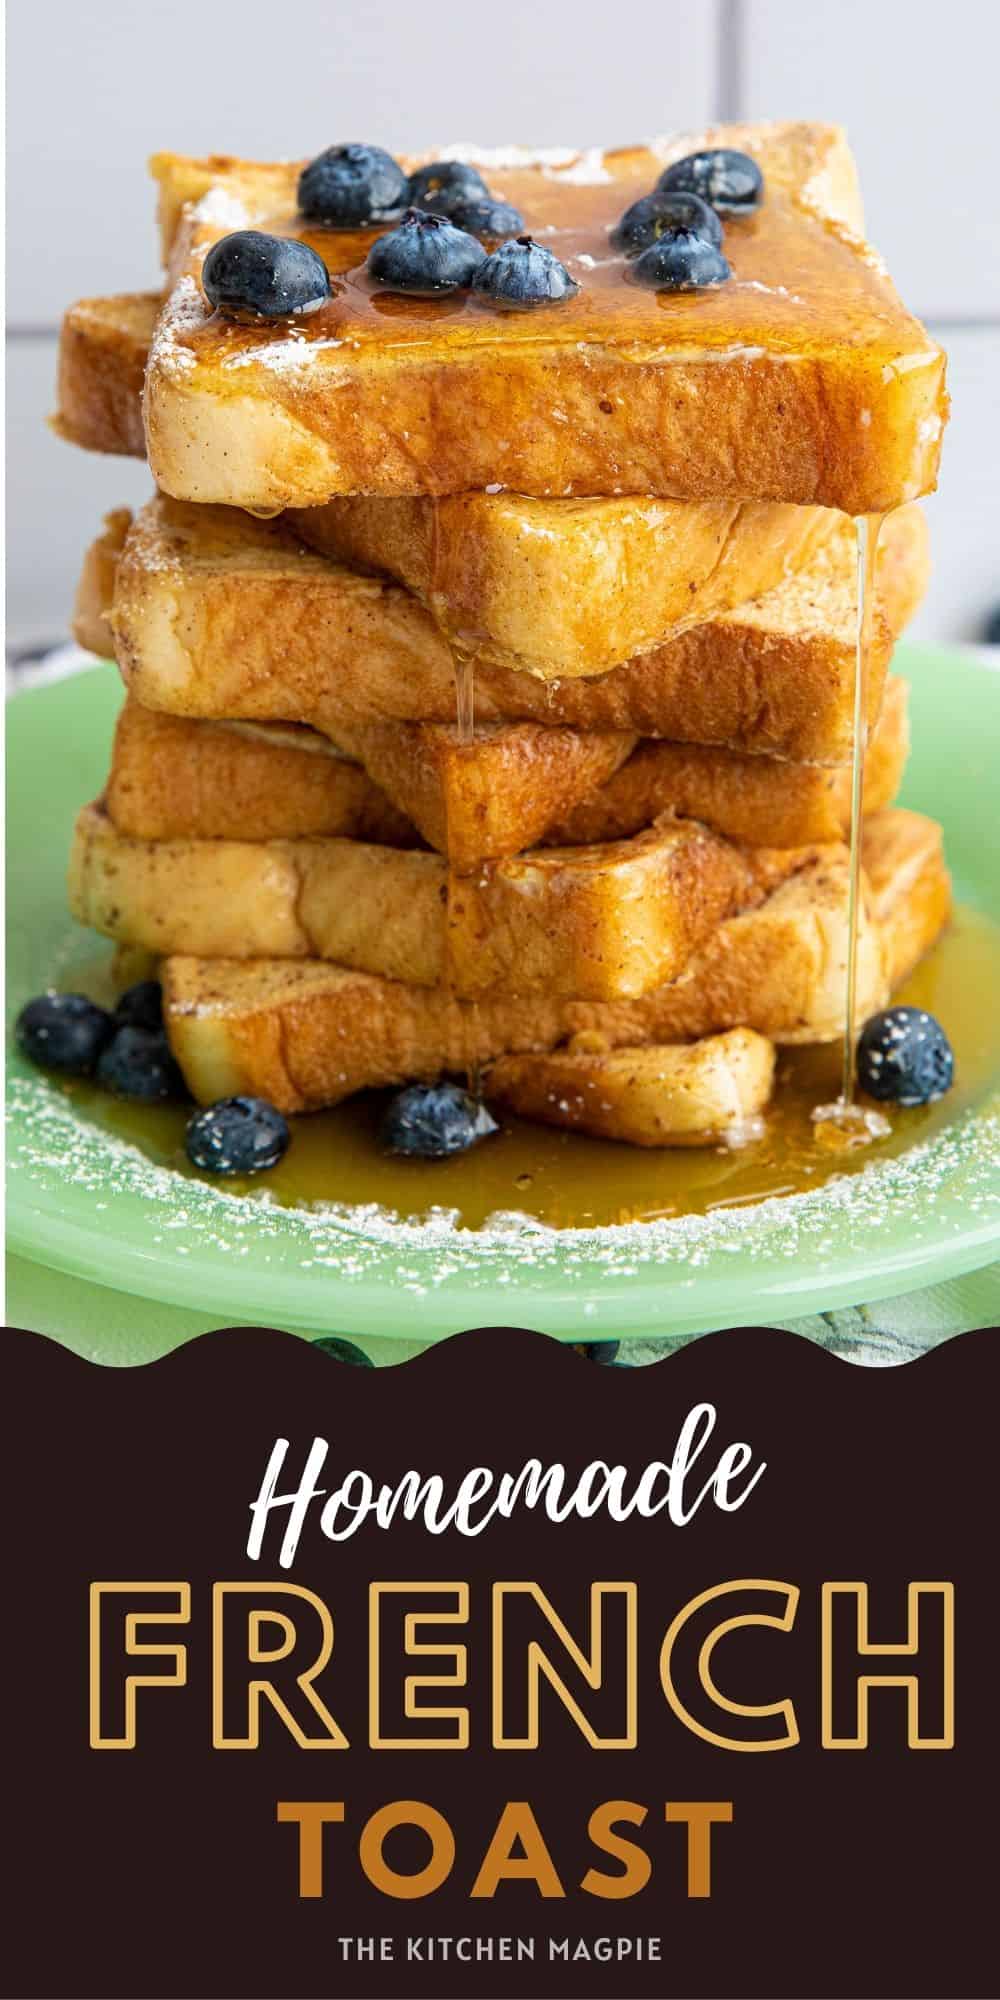 An easy way to make simple french toast topped with syrup and blueberries for a great breakfast.